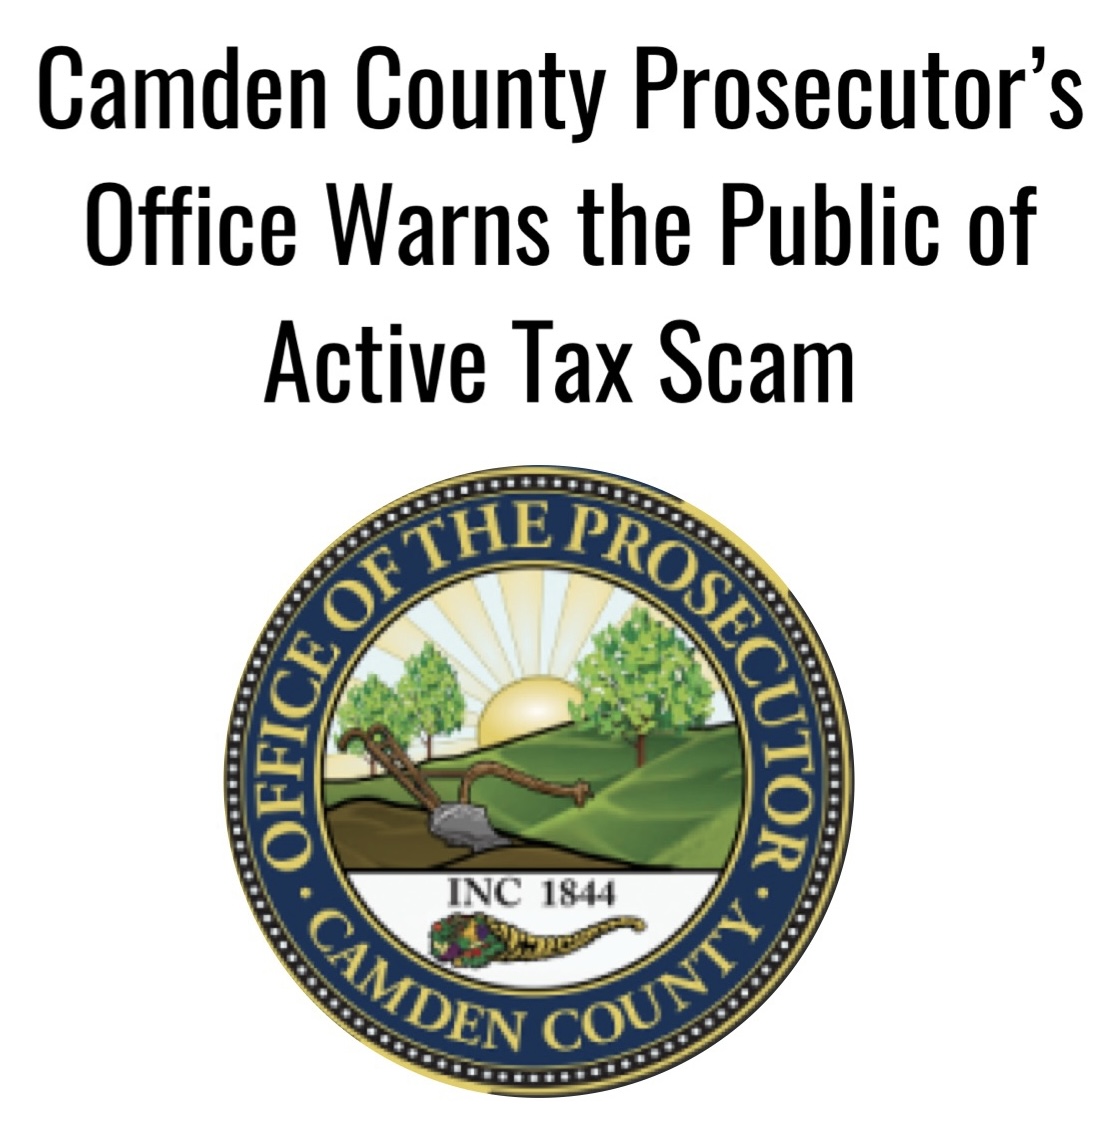 Camden Co. Prosecutor's Office warns the public of active tax scam image